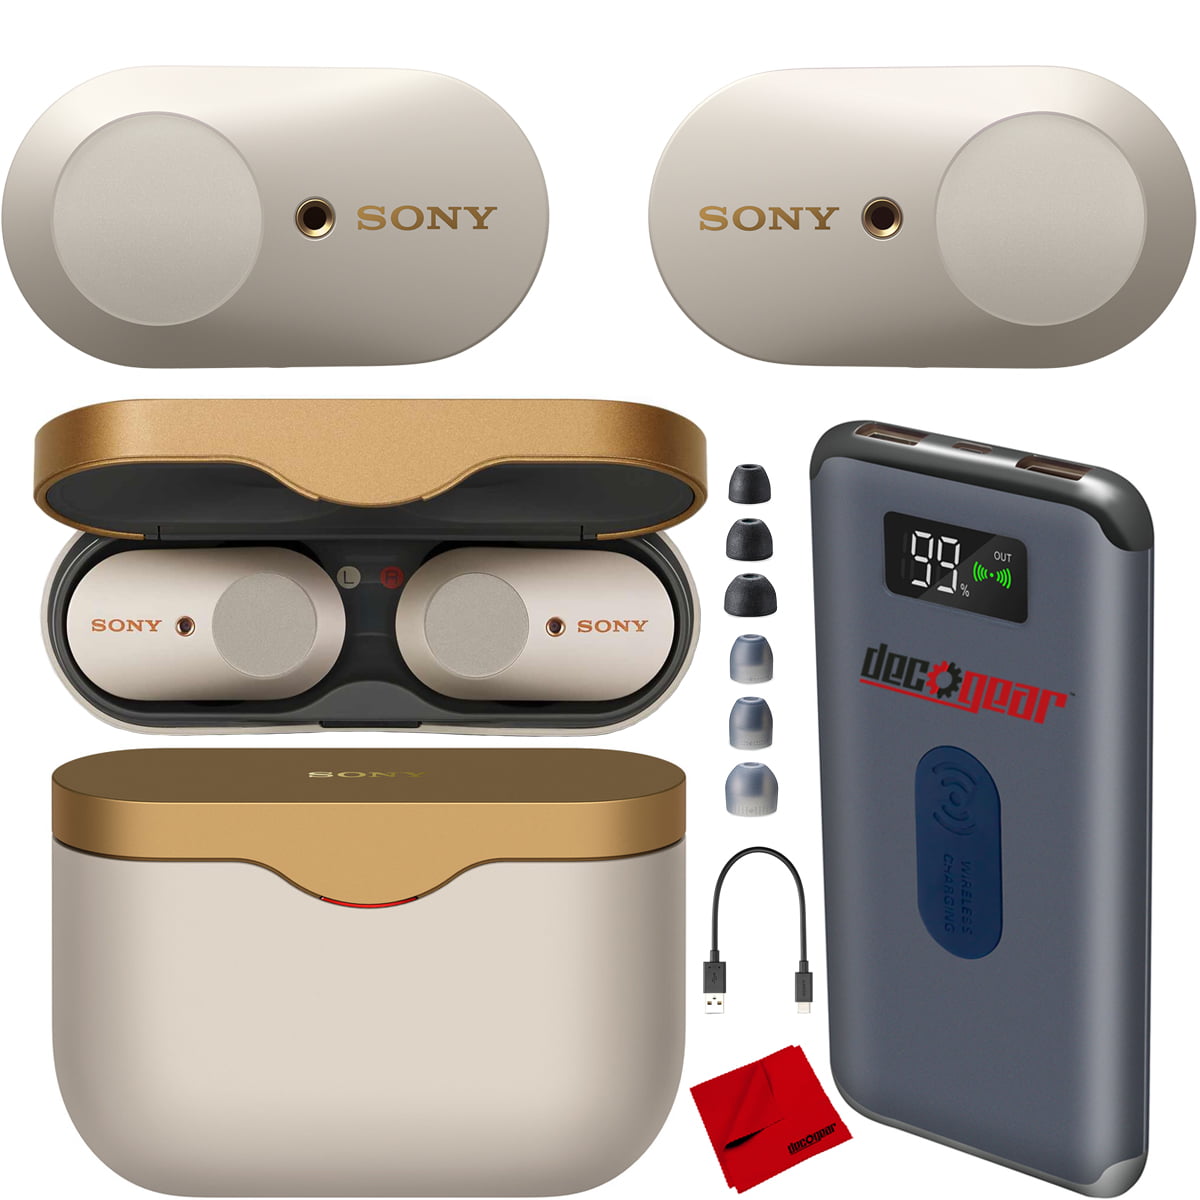 Sony WF-1000XM3 Truly Wireless Earbuds Headphones with Industry-leading  Noise Cancellation - Silver WF-1000XM3/S With Charging Case Bundle  Including